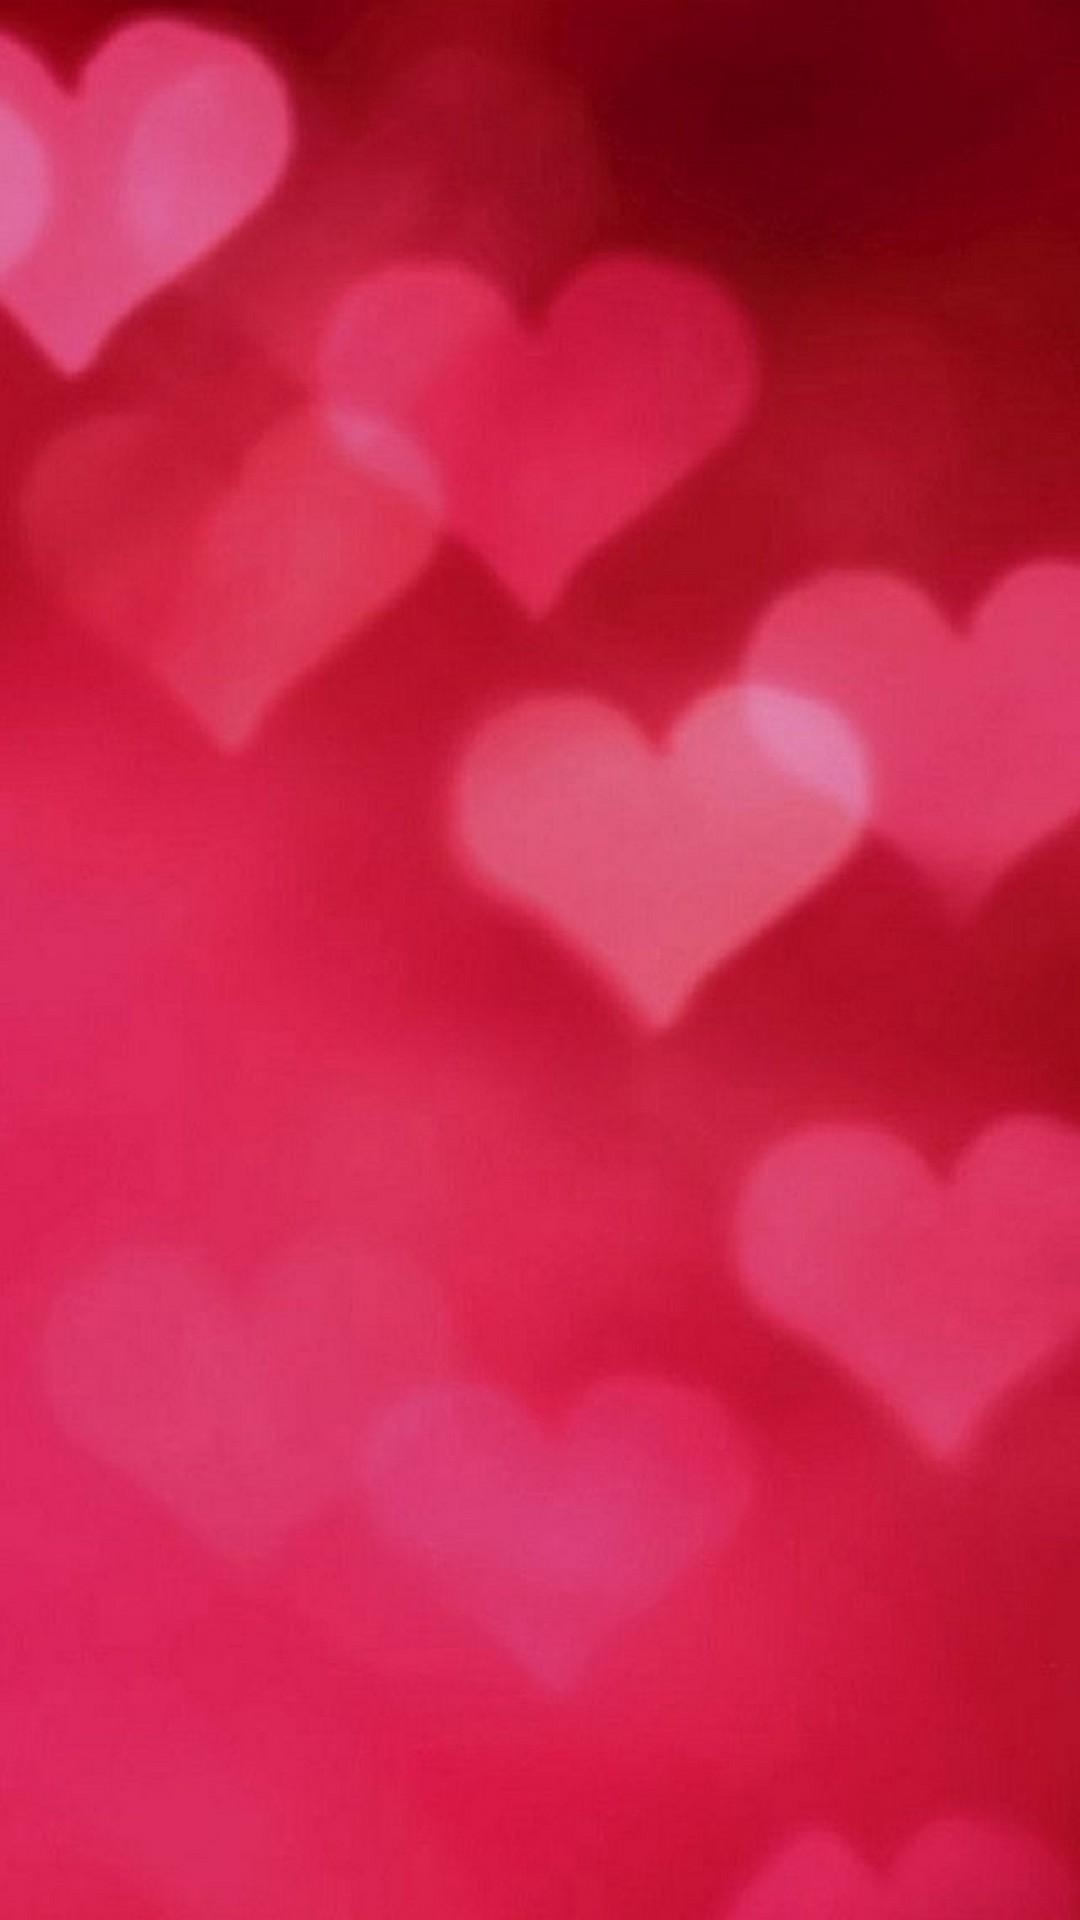 Valentines Day Wallpaper iPhone 6 Cute Wallpaper